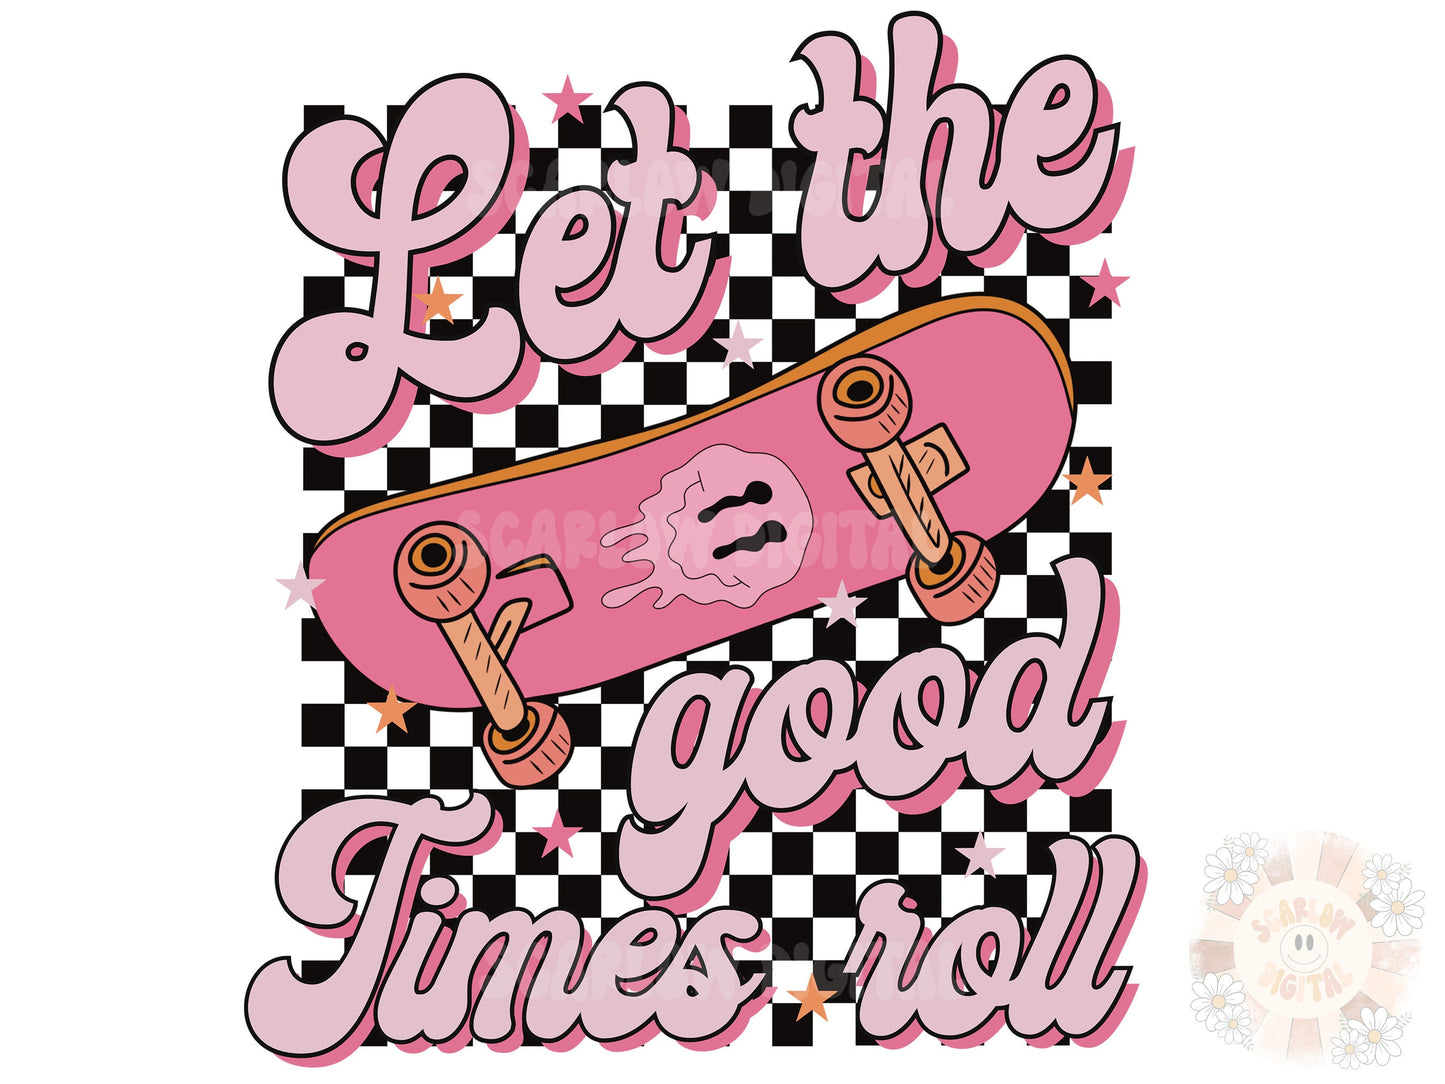 Let The Good Times Roll PNG-skateboard png, retro skater png, skater girl png, little girl png, groovy png, 80s vibes png, positive vibe png